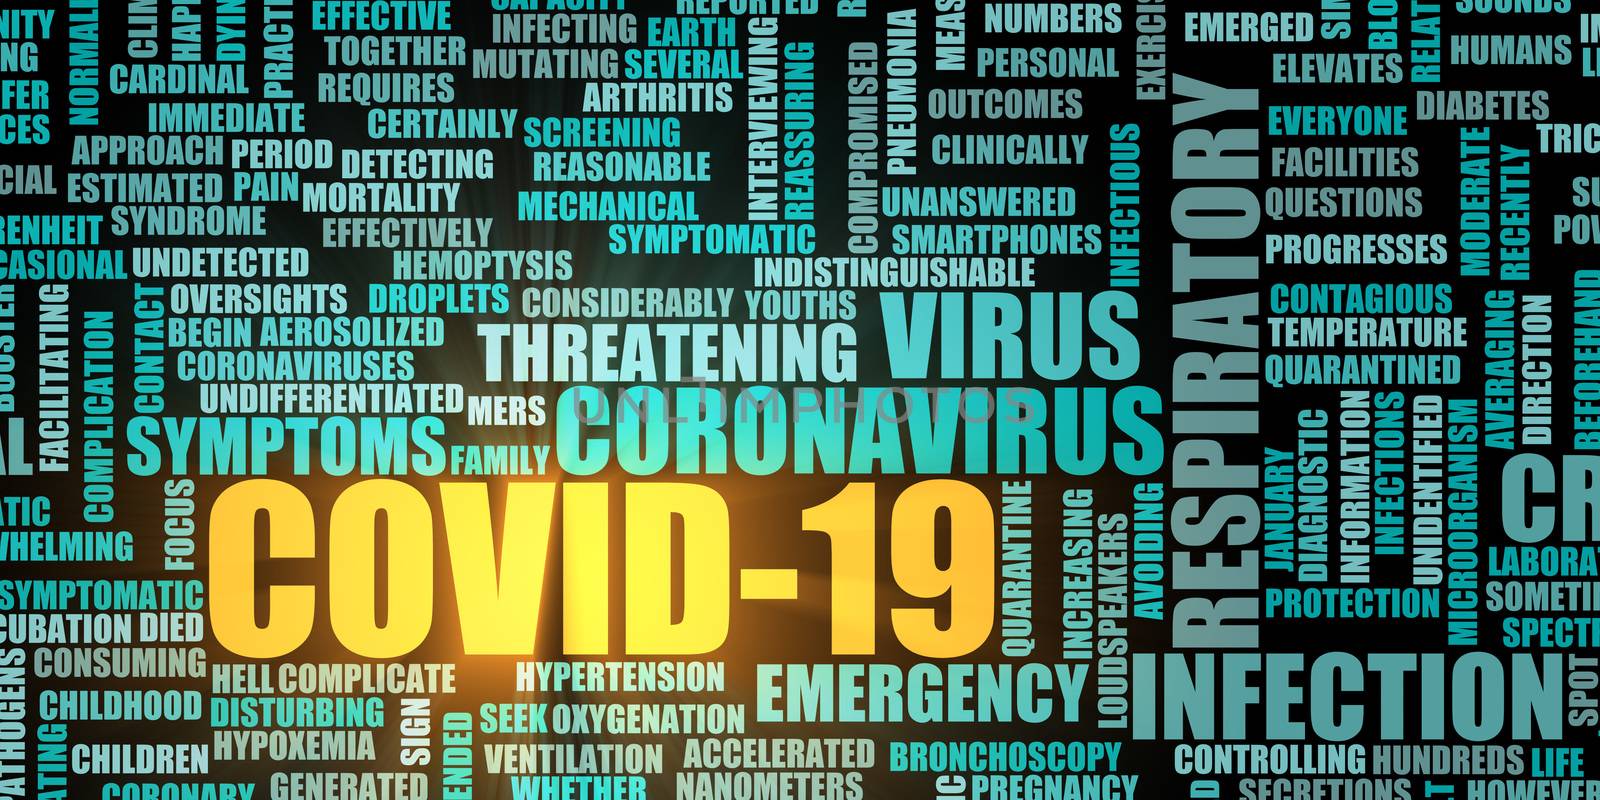 Covid-19 Crisis Management Information and Data Background